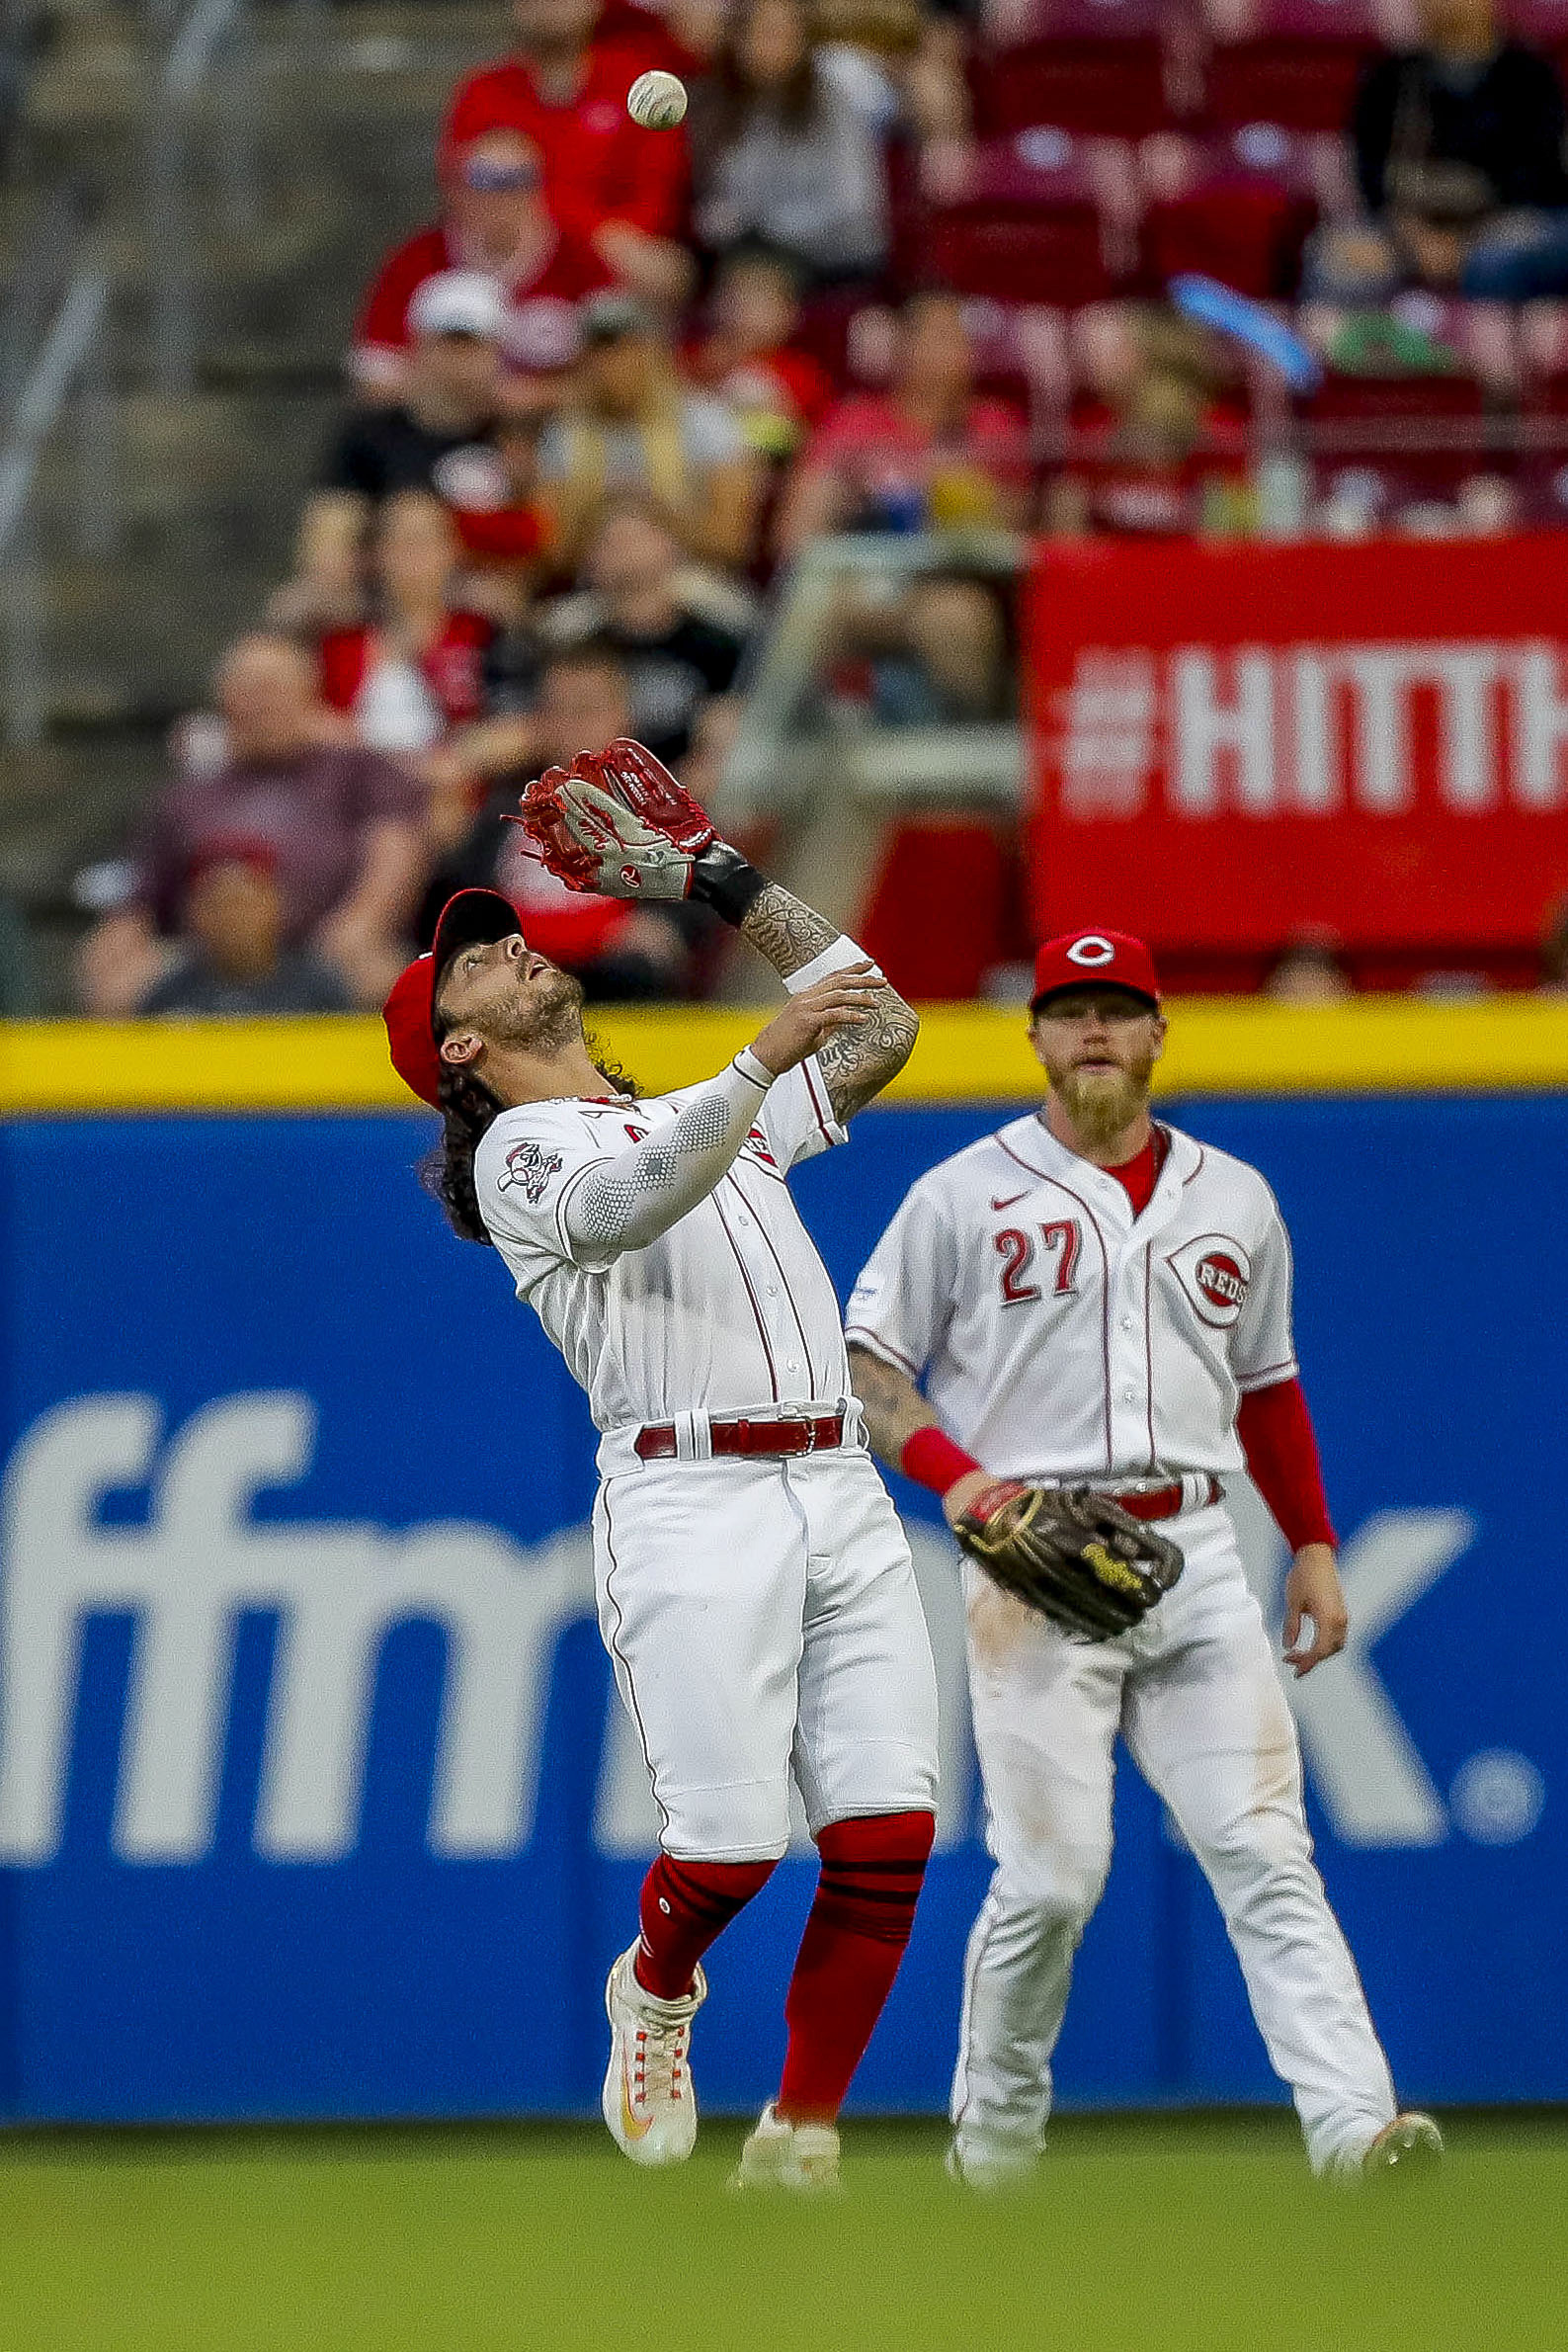 Stats of the Series: Phillies sweep Reds